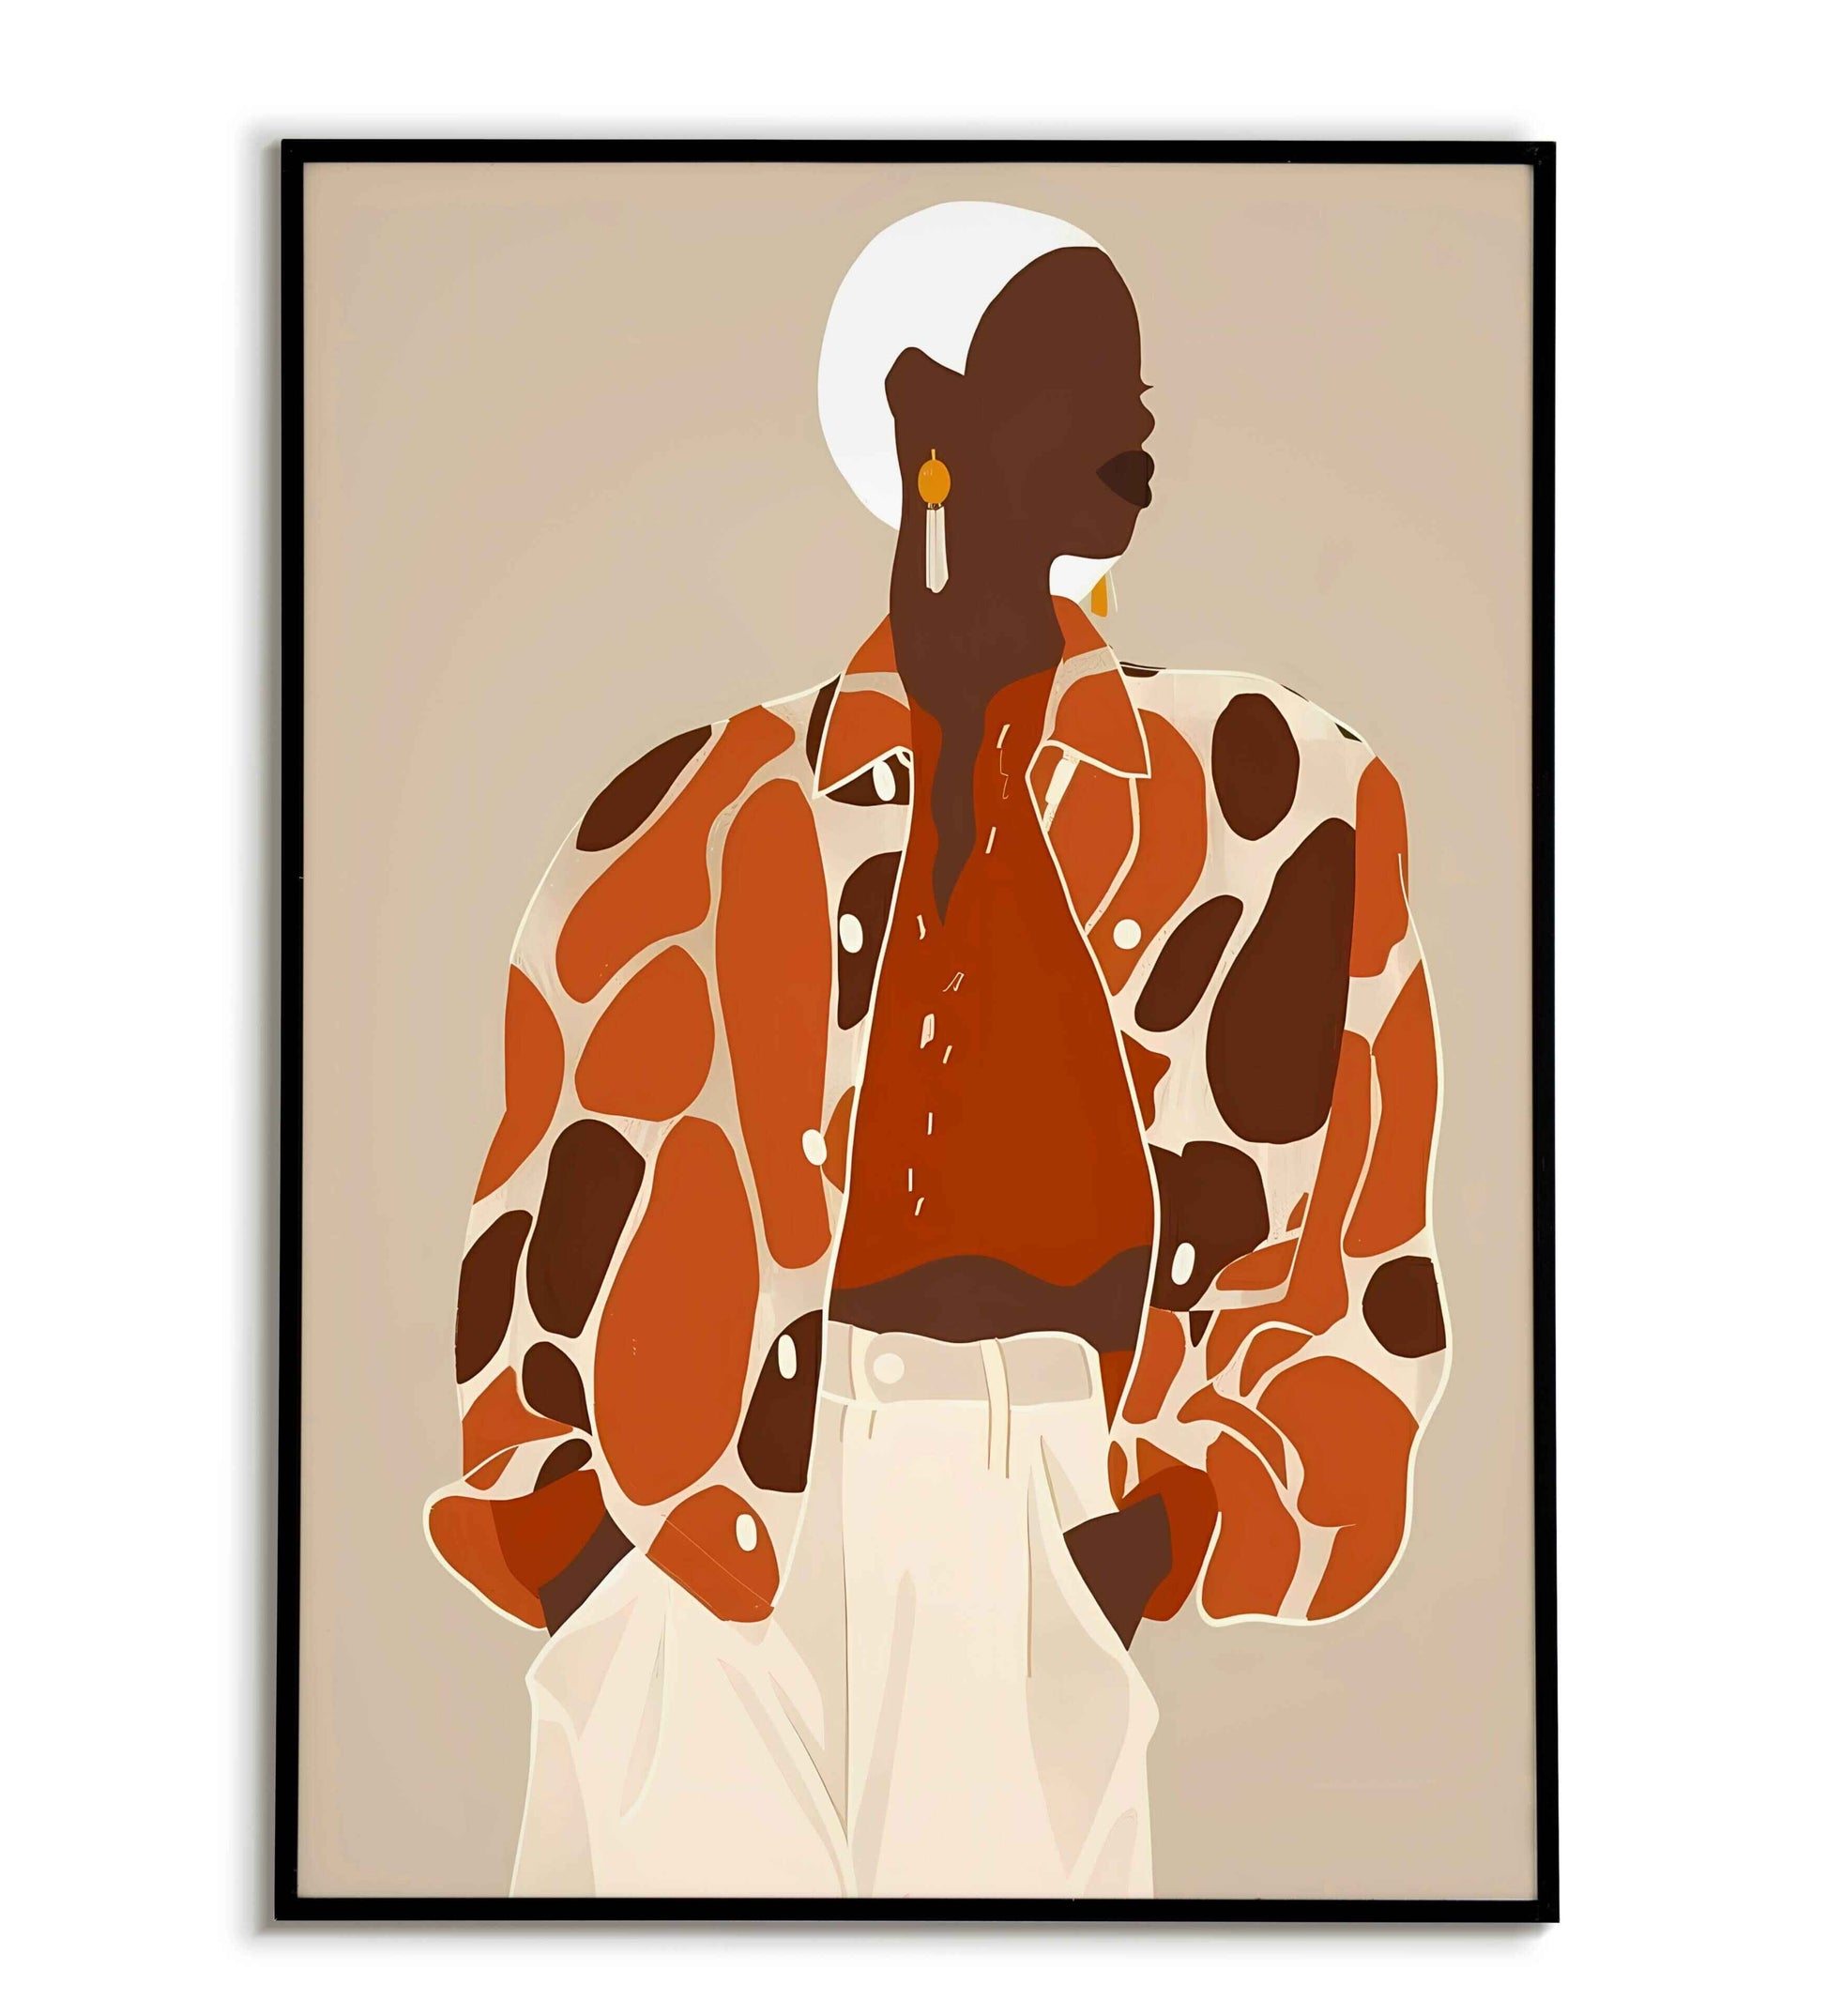 Fashion(2 of 3) printable poster. Fashion Statement (Part 2 of 3). A continuation of the exploration of fashion trends in this stylish poster series. Available for purchase as a physical poster or digital download.